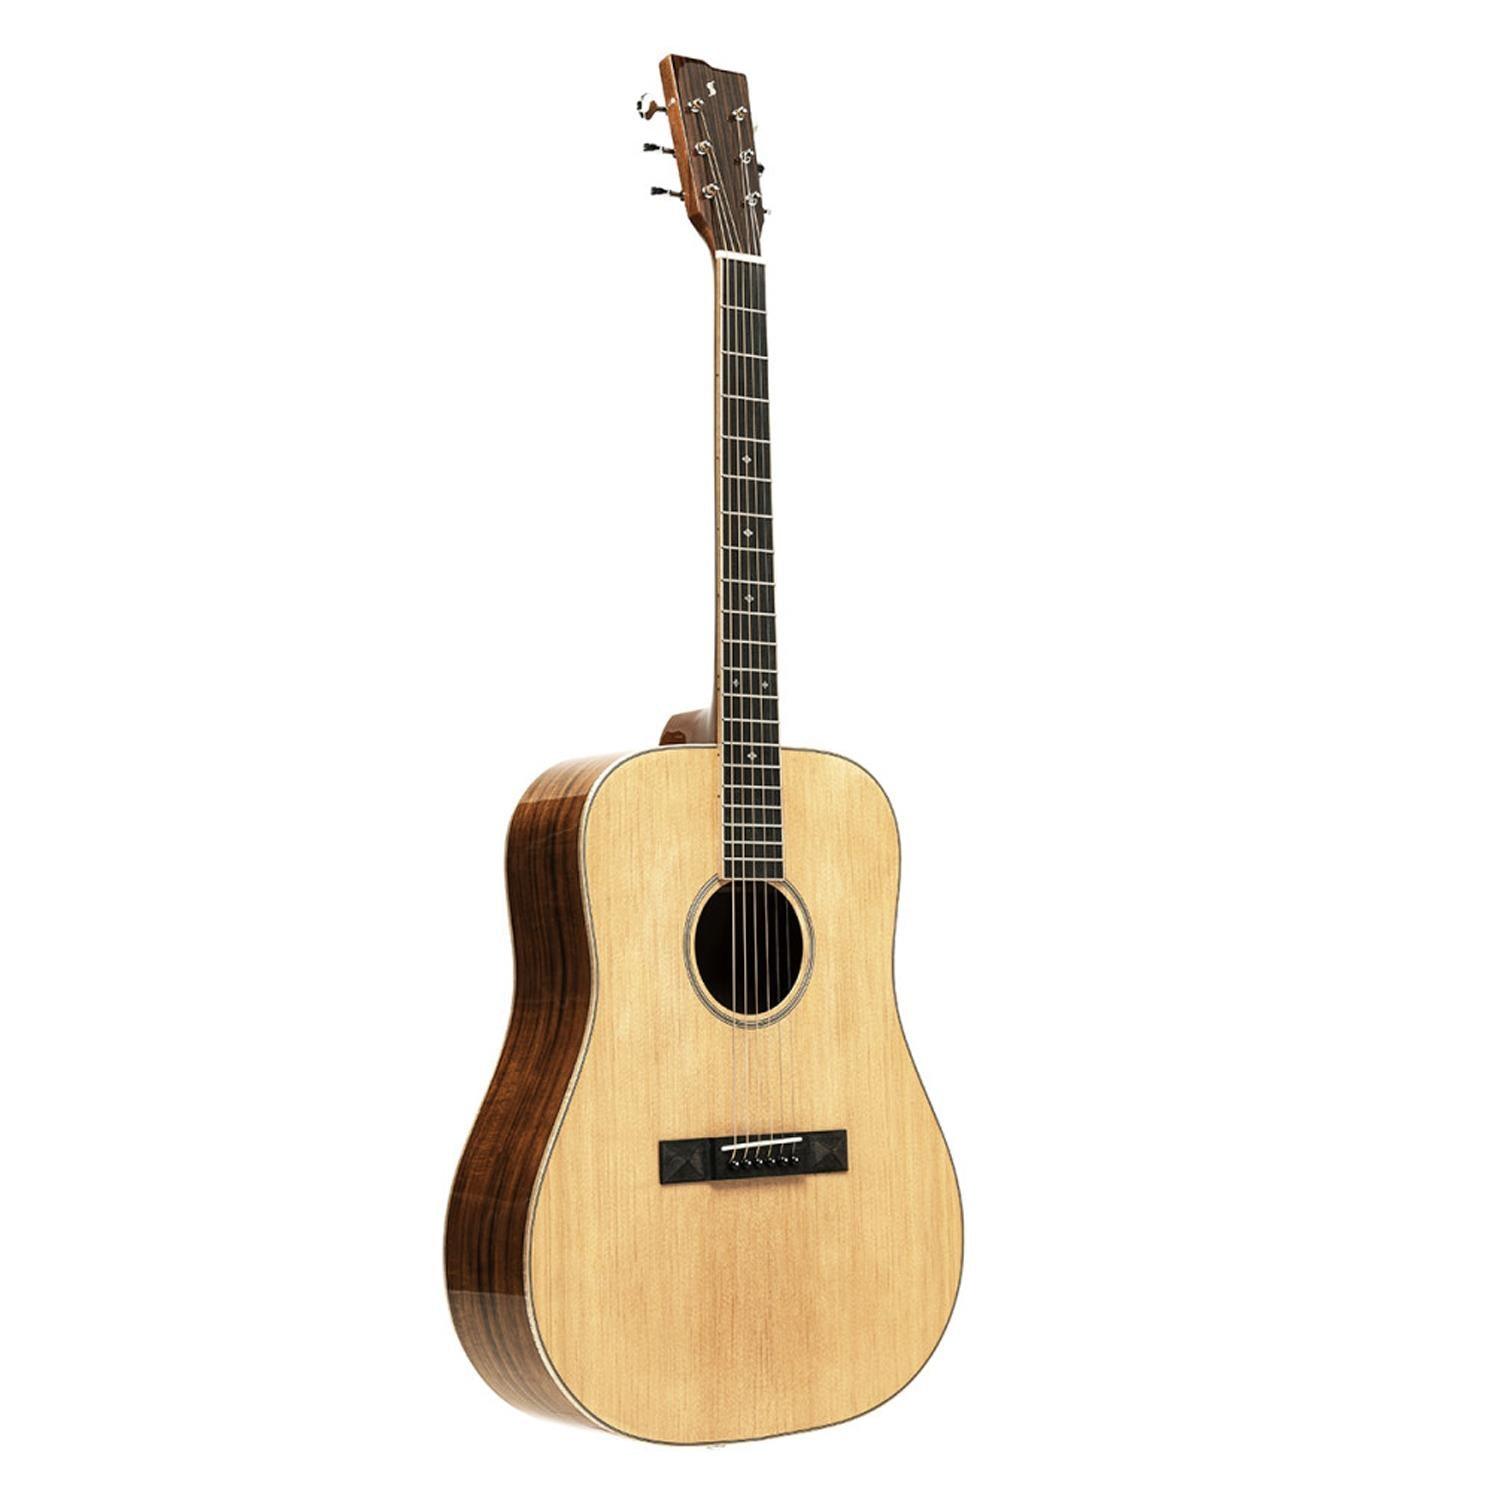 Stagg SA45 D-AC Series 45 Dreadnought Acoustic Guitar with Spruce Top - DY Pro Audio